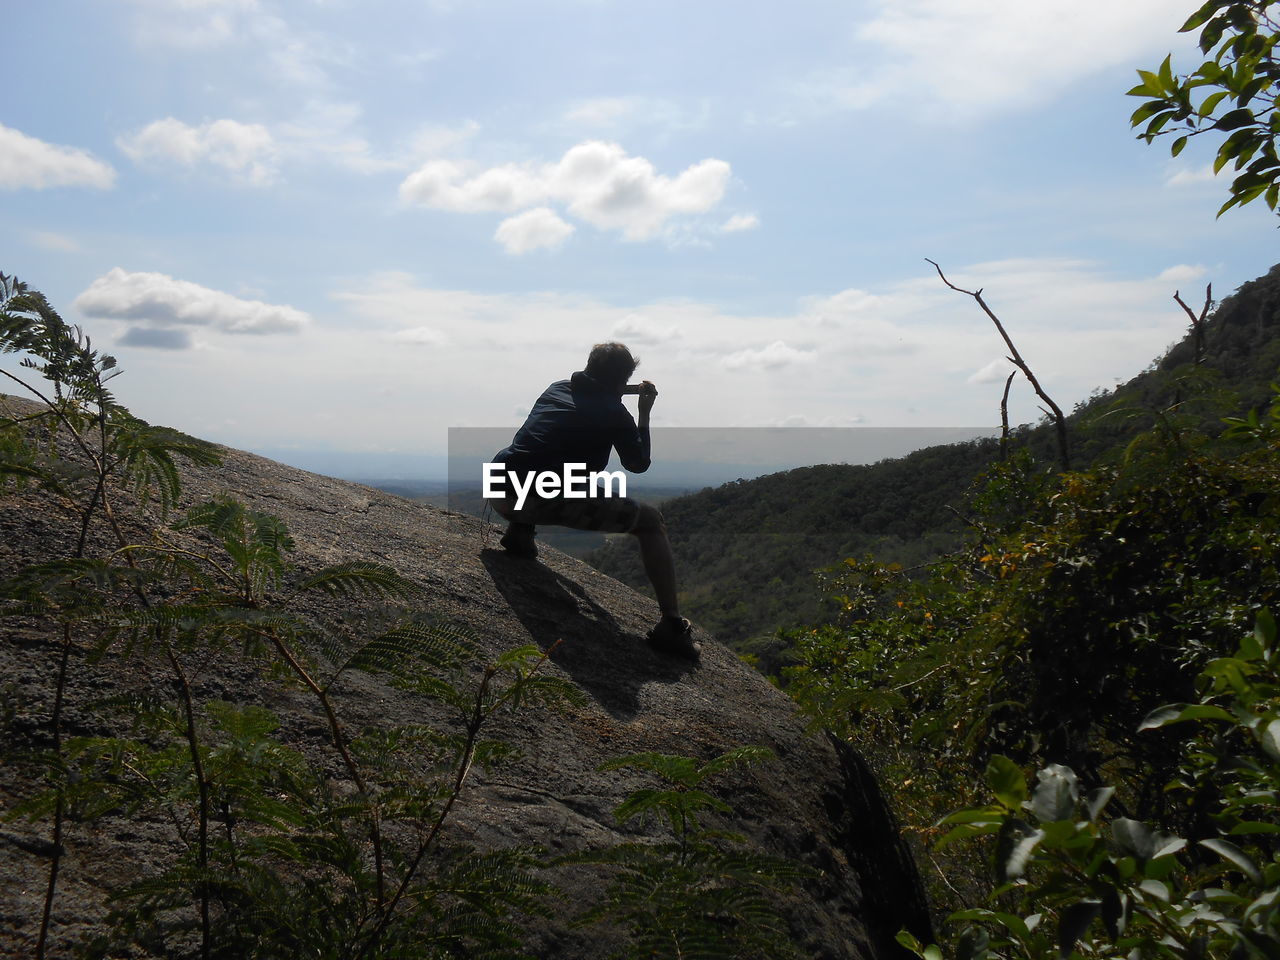 Rear view of man crouching on cliff against sky